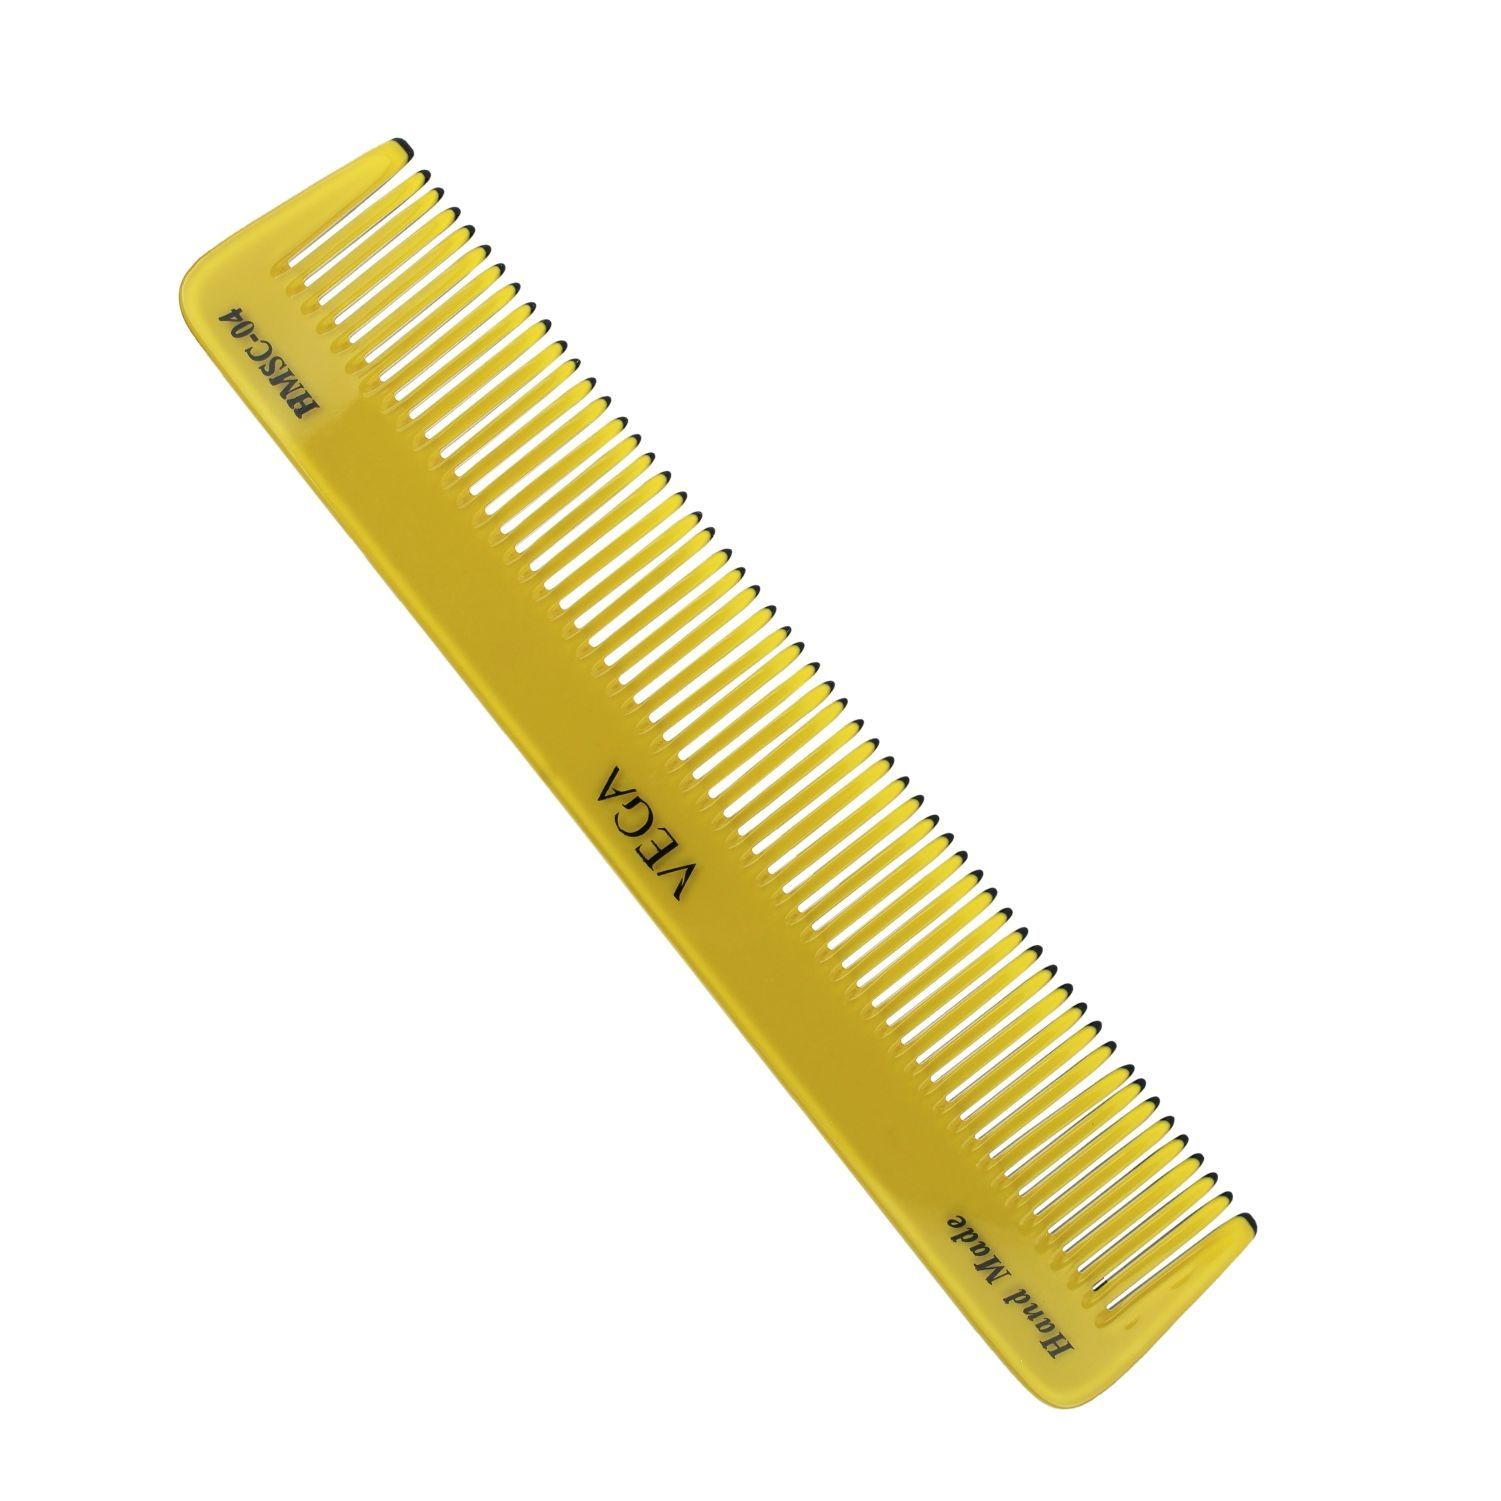 VEGA HMSC-04 Dual Color Comb (Color May Vary)